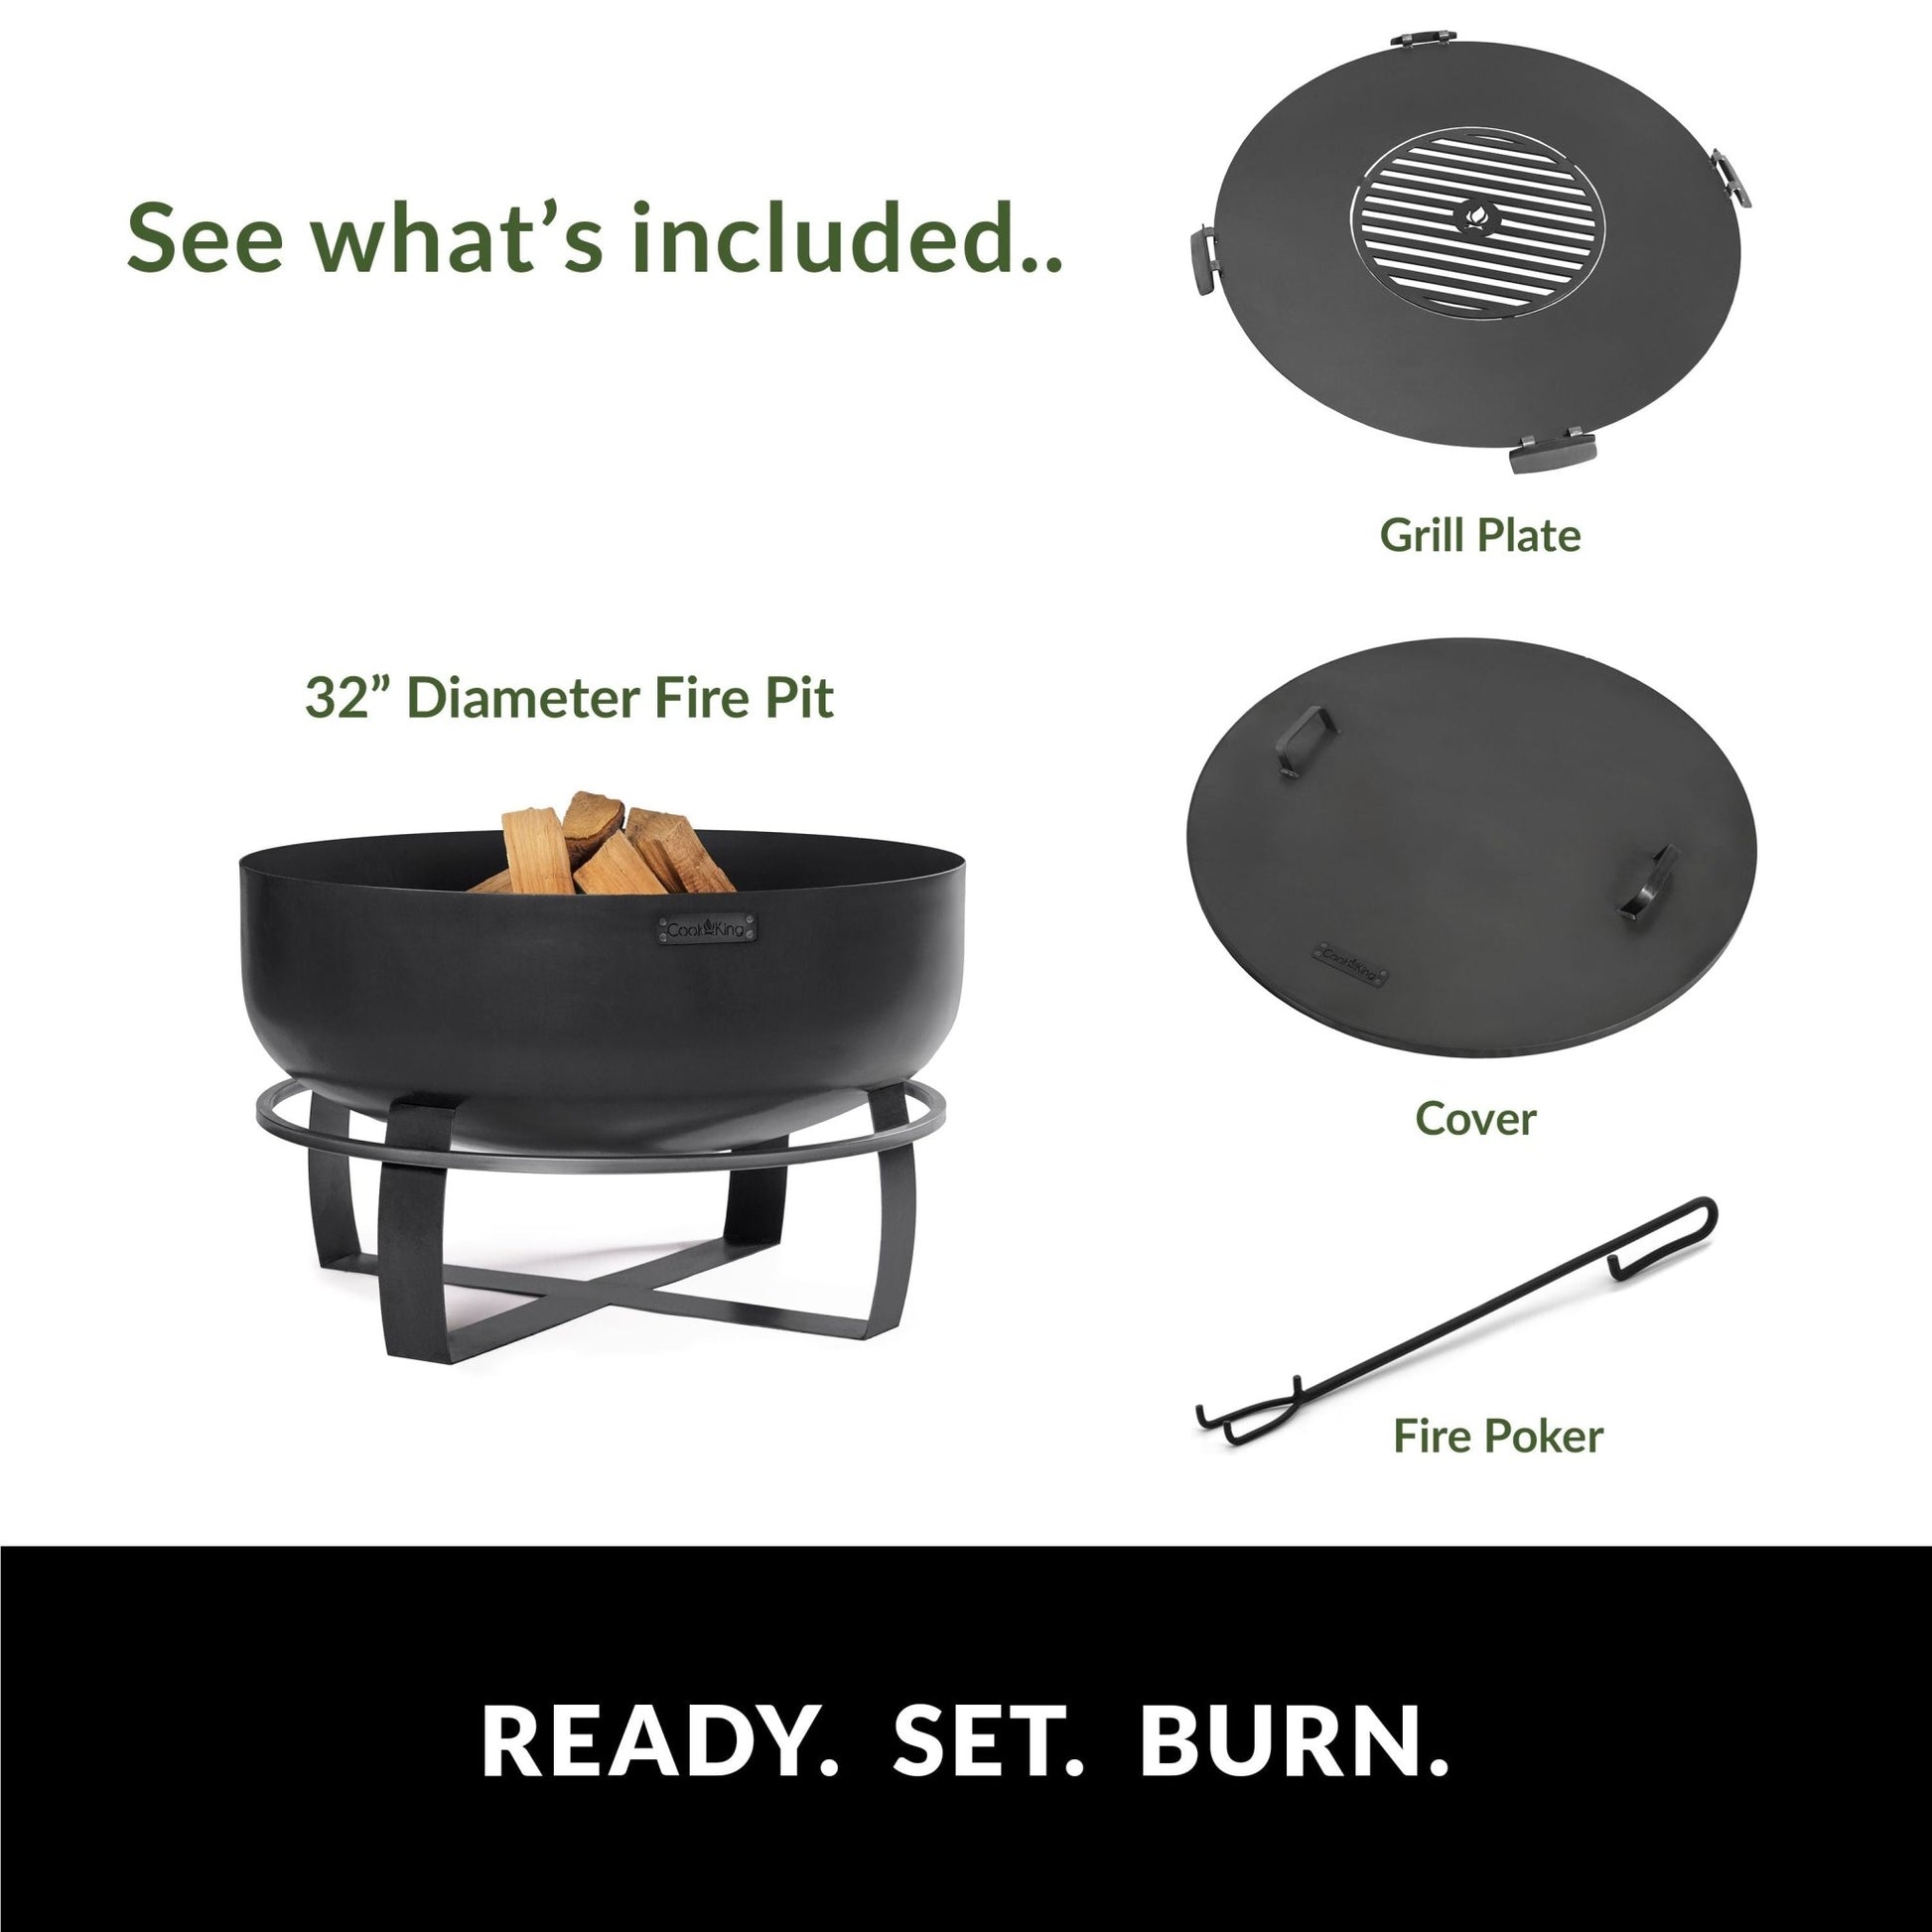 Ignition 32" XXL Fire Pit with Grill Plate and Cover Lid - Good Directions